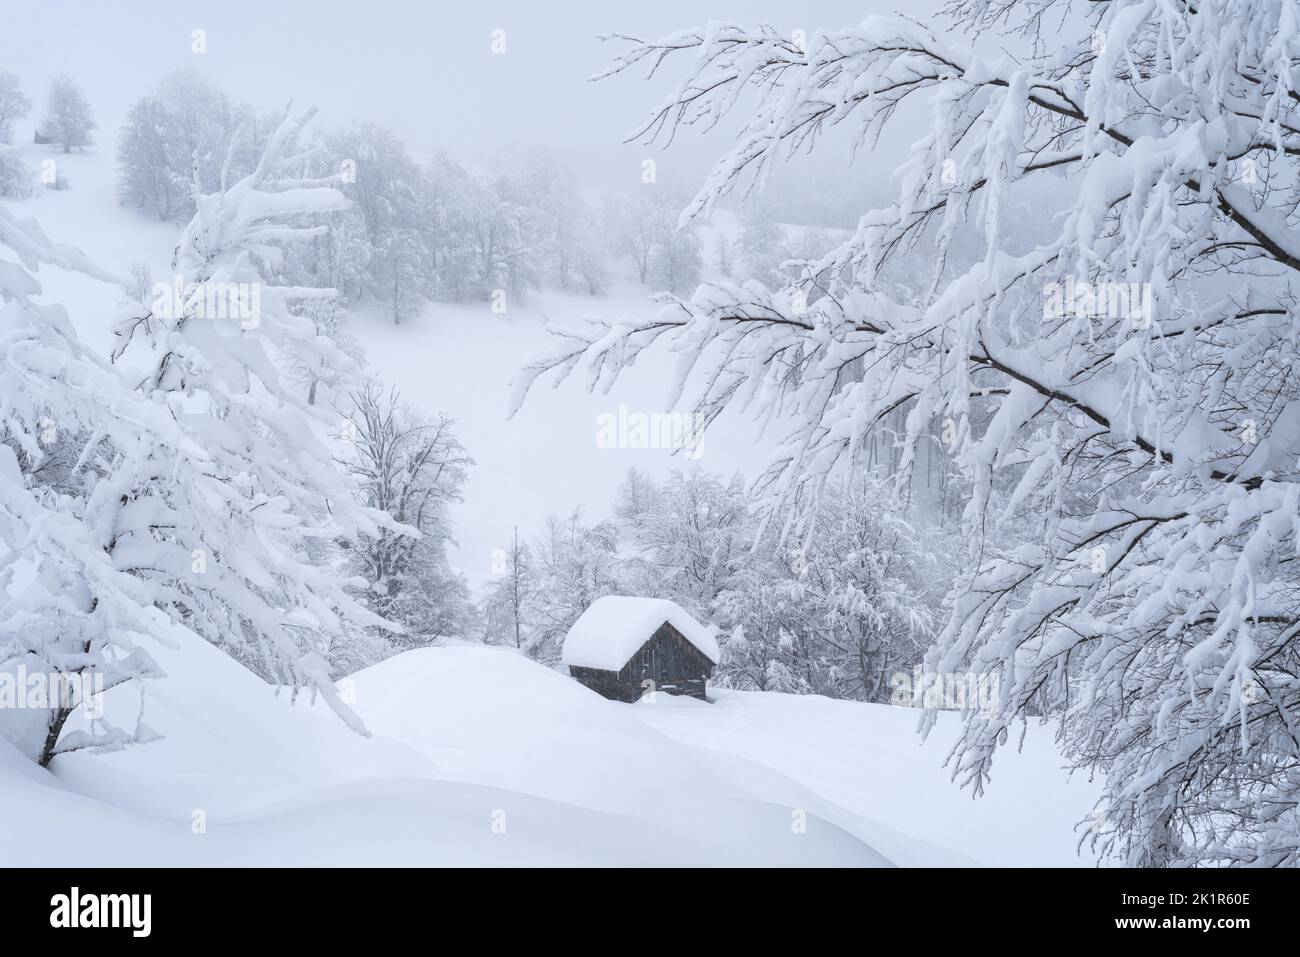 Fabulous winter view of a wooden house in a snowy mountain forest after a snowfall Stock Photo